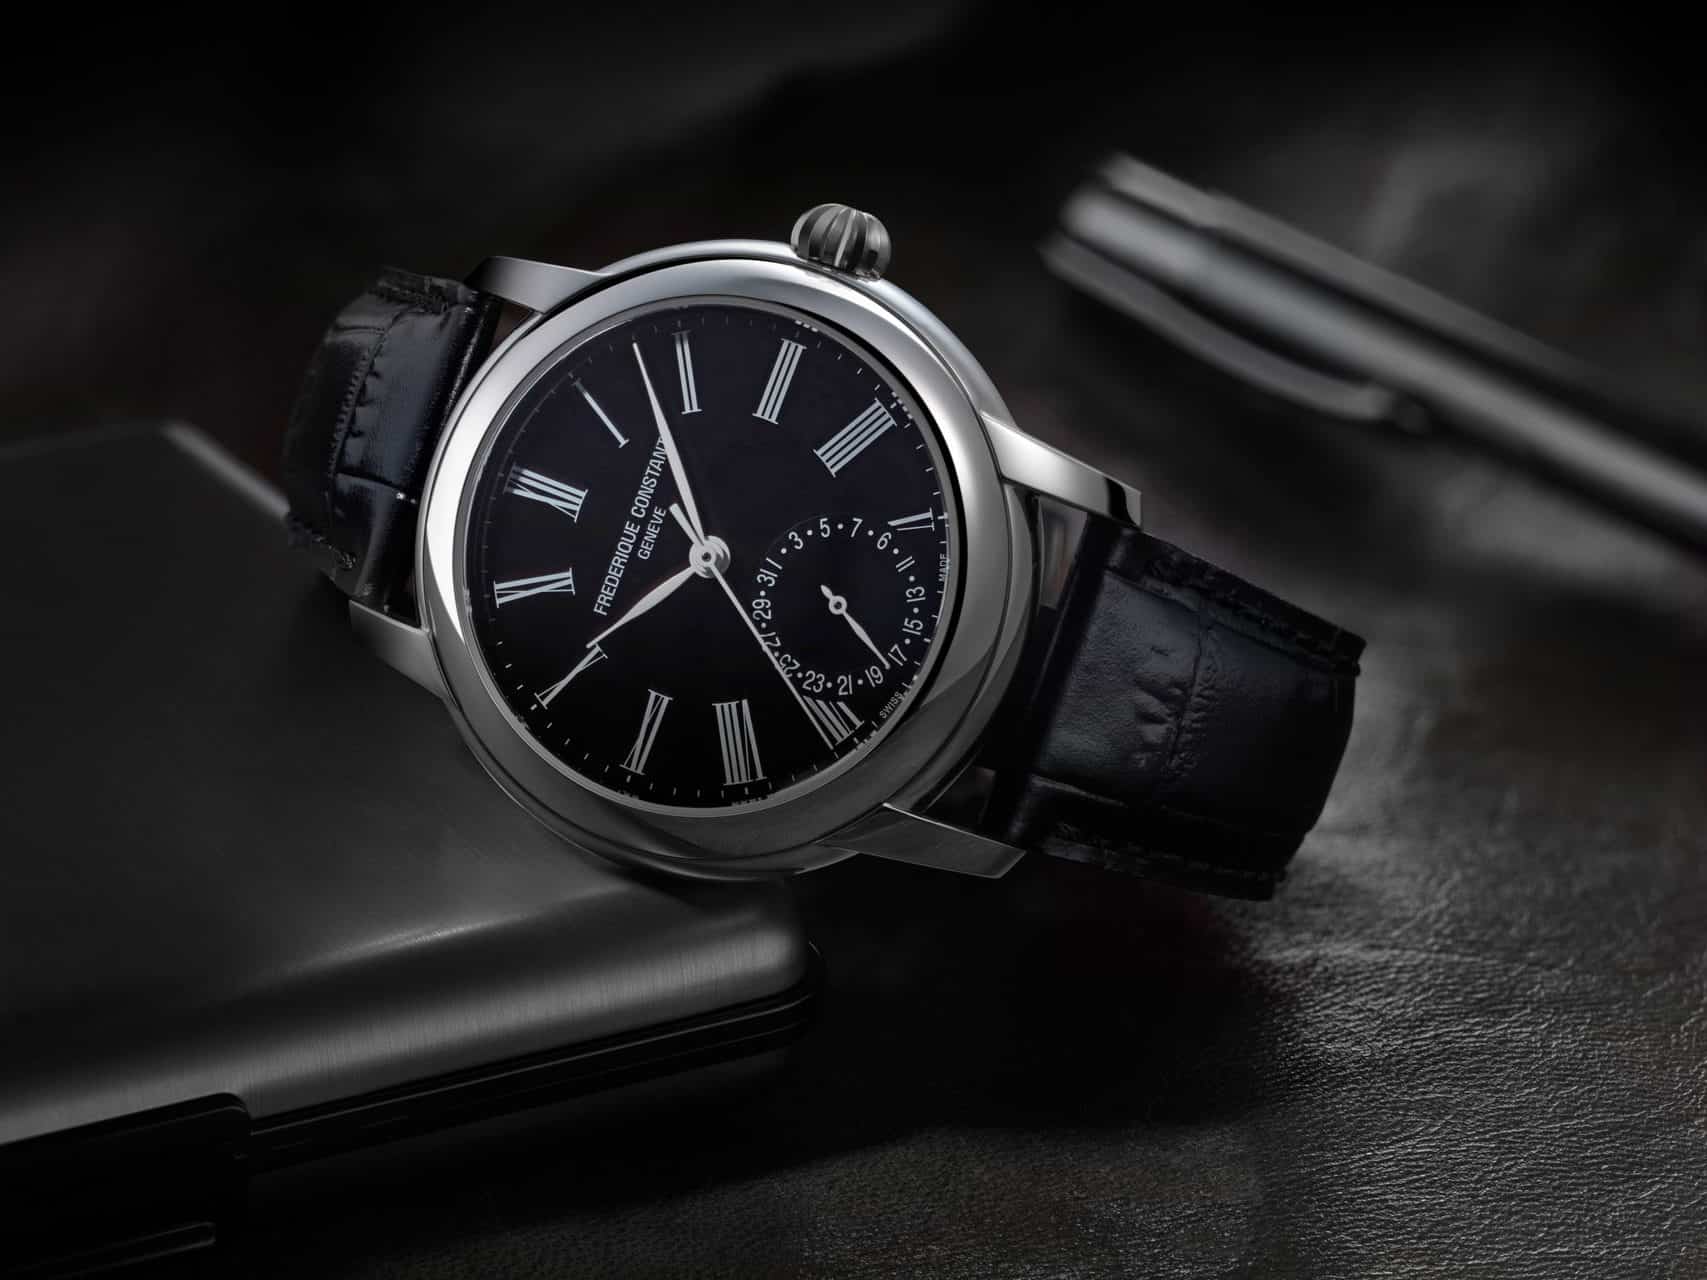 Frederique Constant presents a new look for the Classic Manufacture